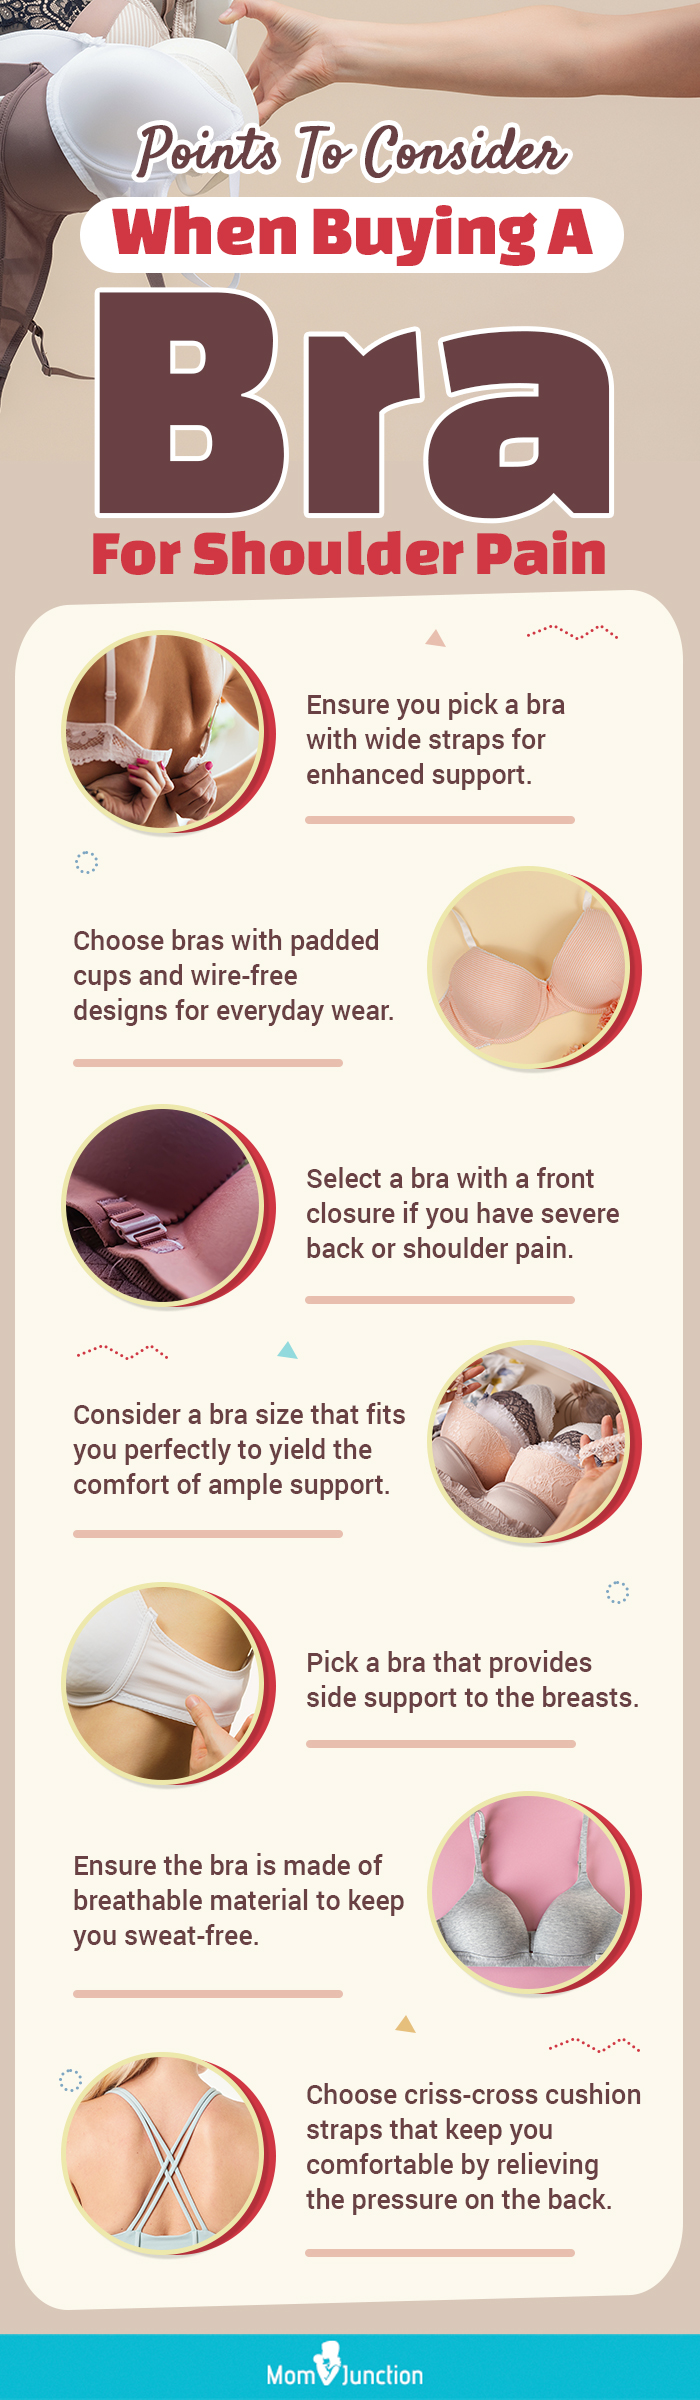 Points-To-Consider-When-Buying-A-Bra-For-Shoulder-Pain (infographic)